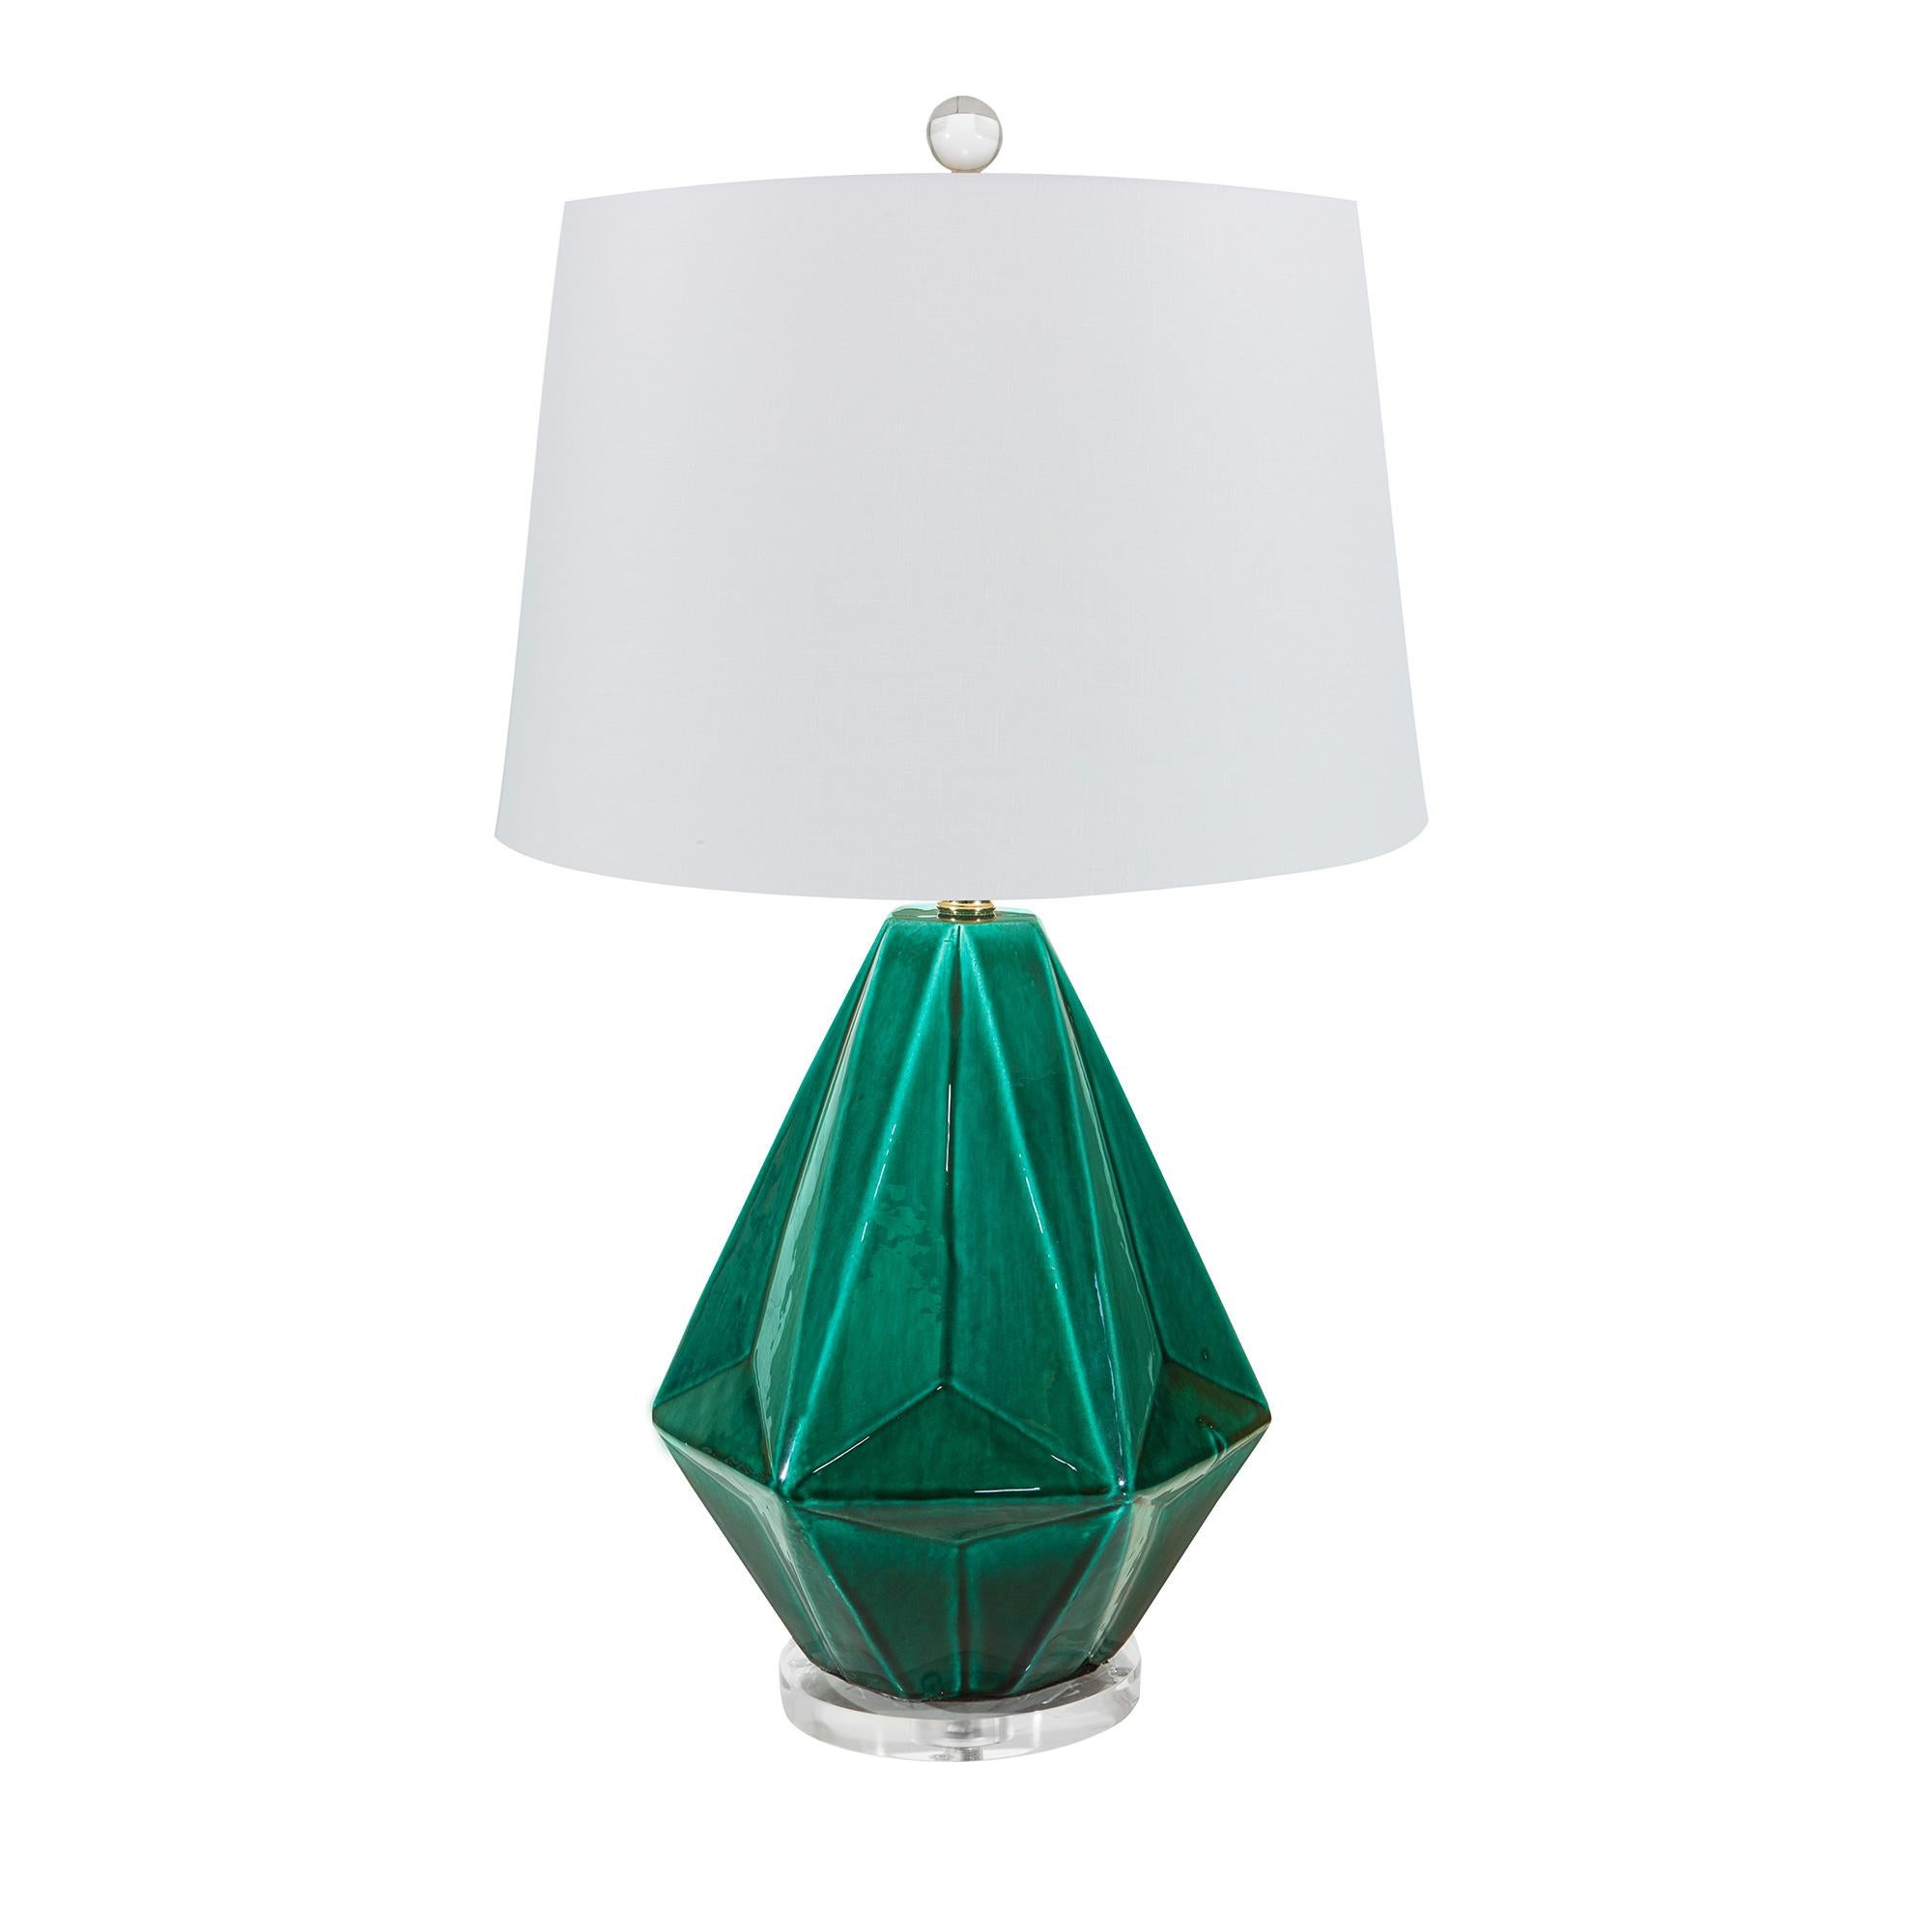 Green (QR-16105.FOREST.0) Liza Faceted Ceramic Table Lamp with Ivory Linen Shade by CuratedKravet